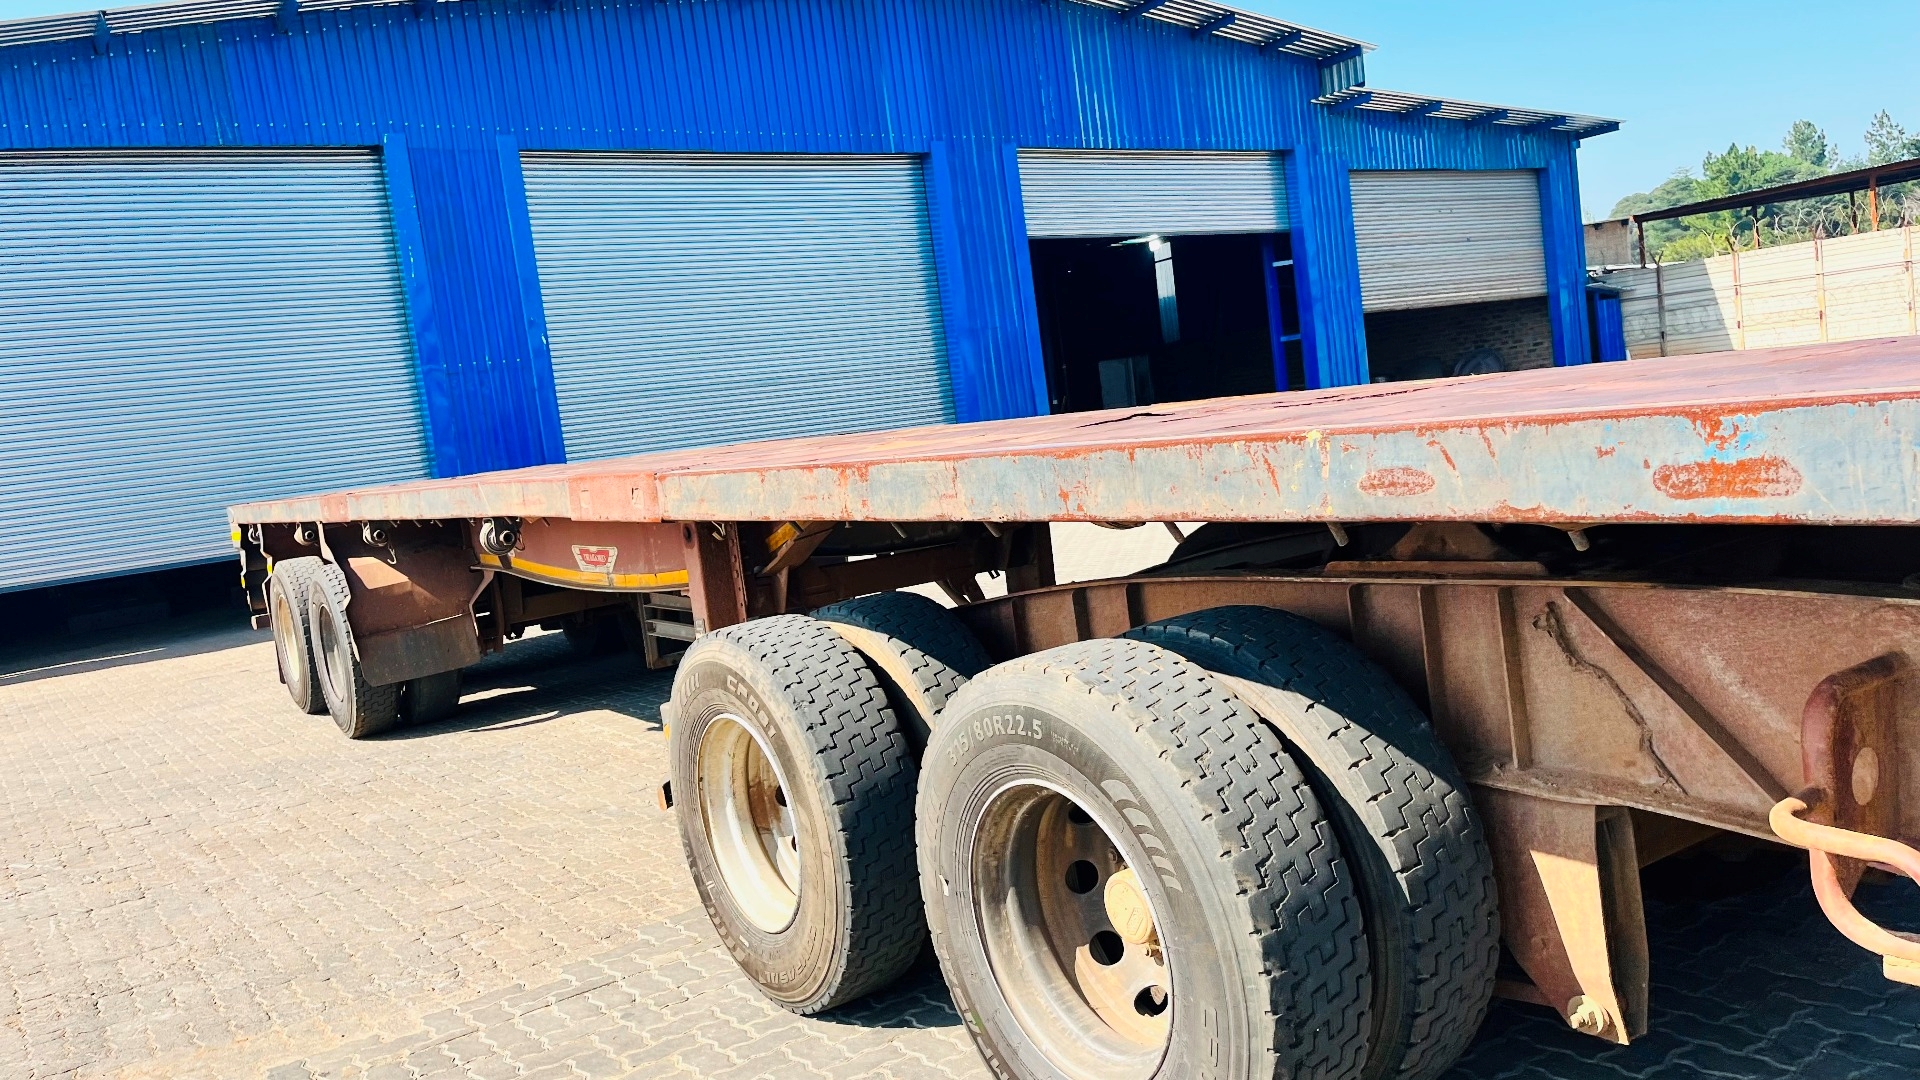 Trailord Trailers Flat deck SUPER LINK FLAT DECK 2005 for sale by Pomona Road Truck Sales | Truck & Trailer Marketplaces